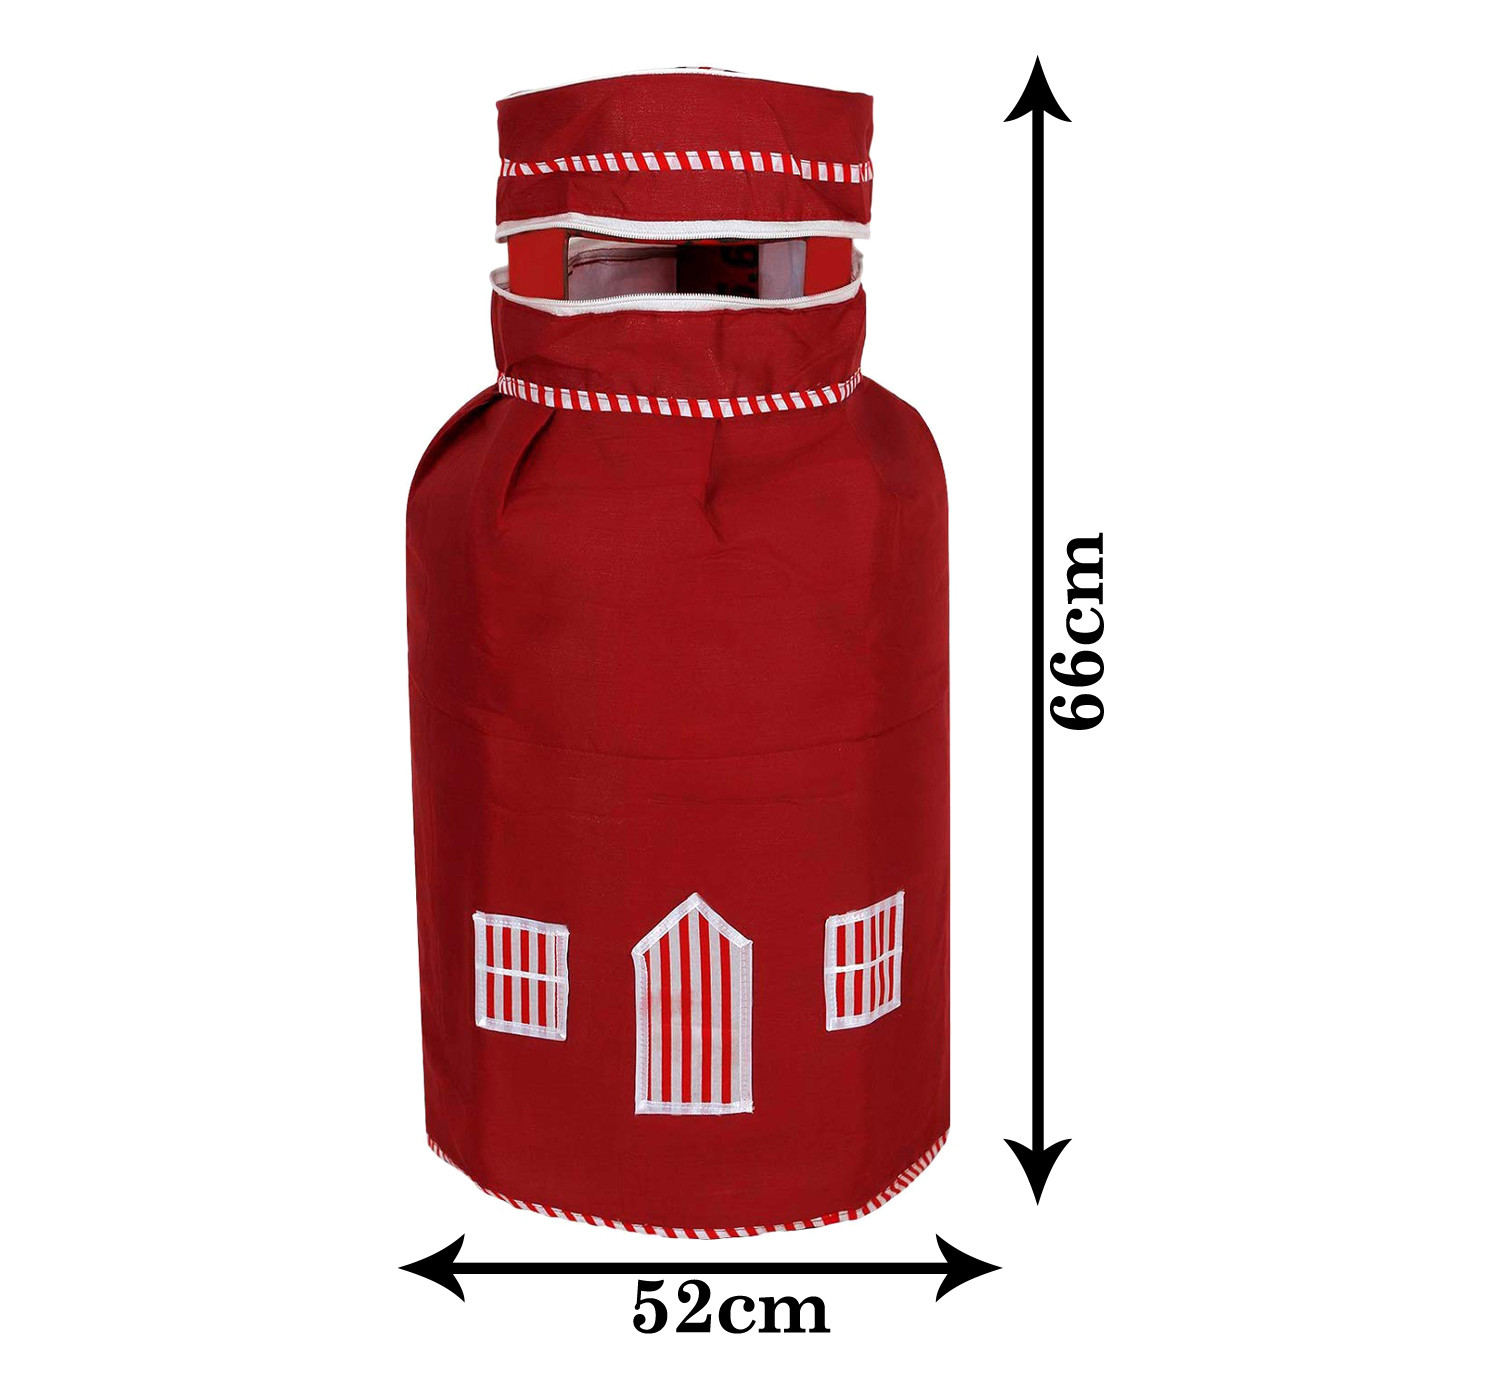 Kuber Industries 2 Pieces Cotton Dust-Water Proof LPG Gas Cylinder Cover (Red) - CTKTC40742